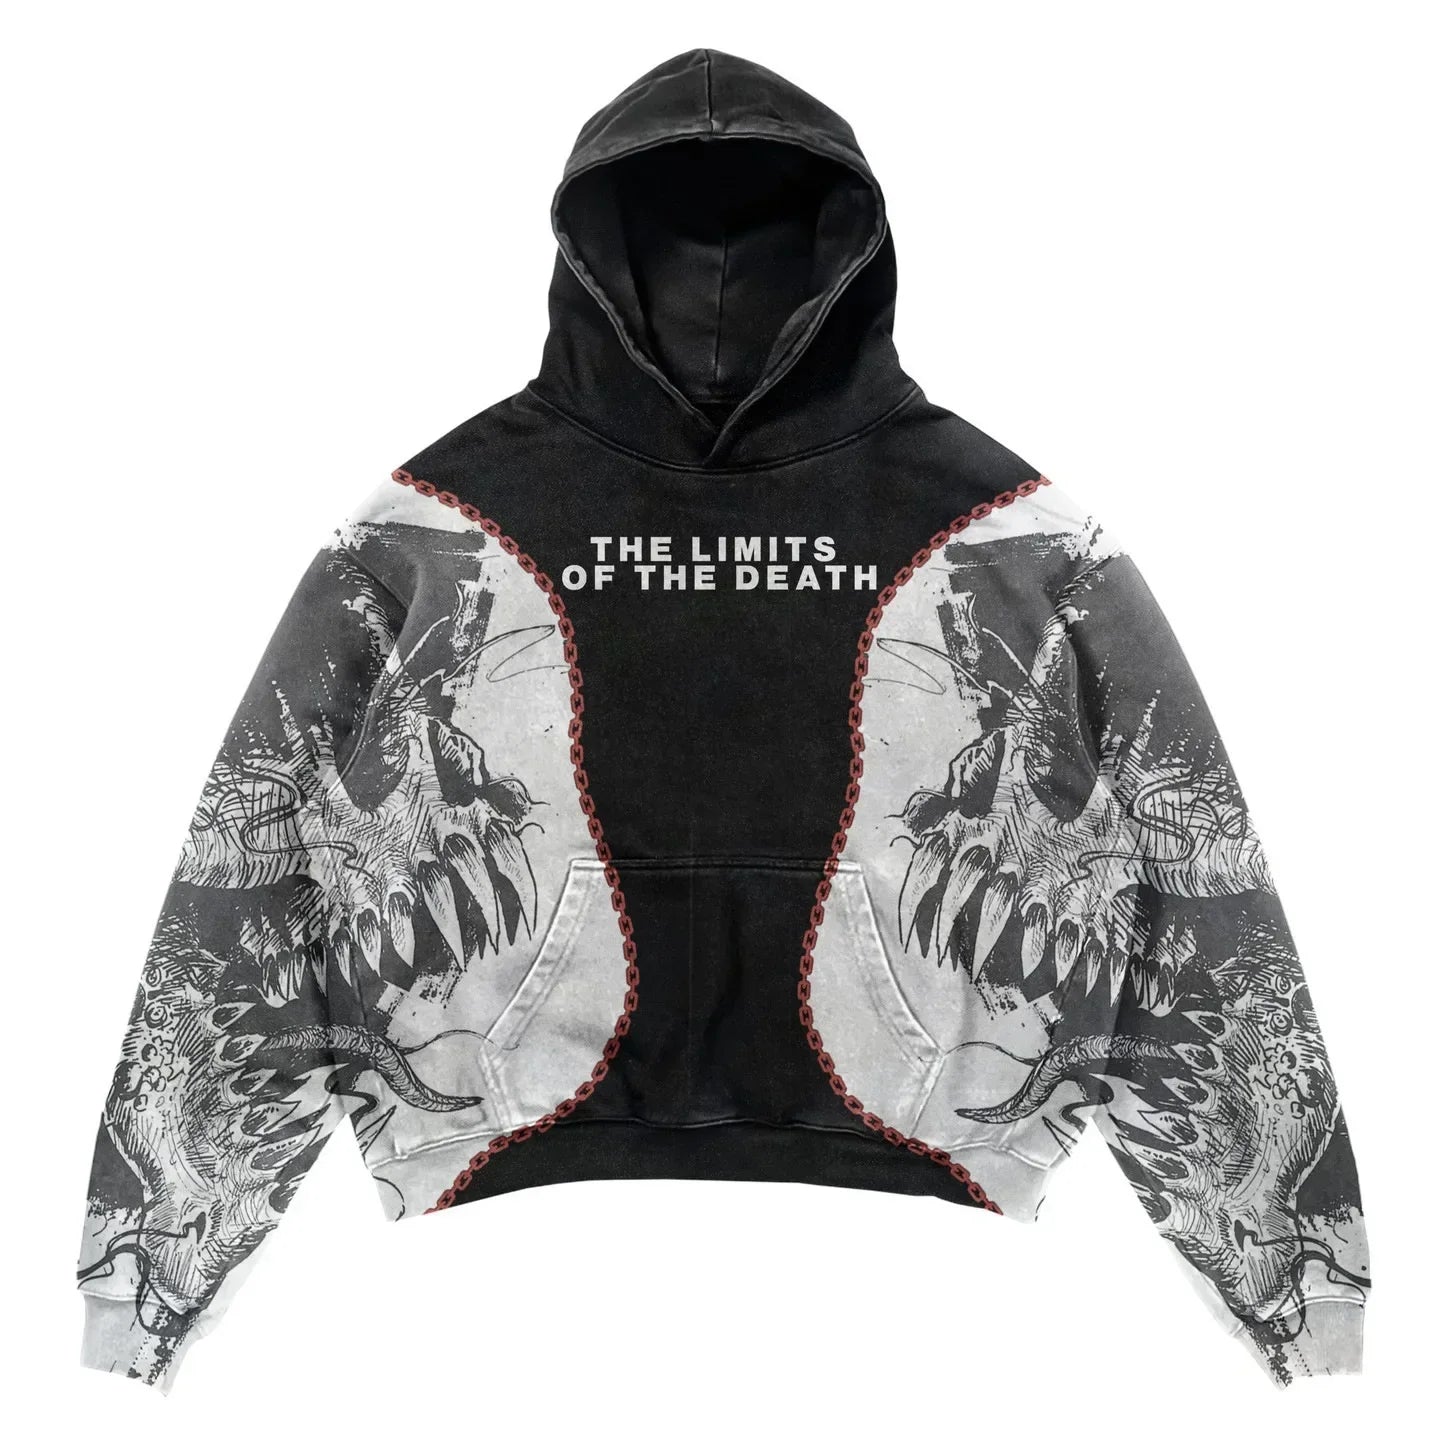 A Maramalive™ Explosions Printed Skull Y2K Retro Hooded Sweater Coat Street Style Gothic Casual Fashion Hooded Sweater Men's Female from our men's clothing line, featuring the text "THE LIMITS OF THE DEATH" with an intricate monochrome design of skulls and skeletal figures on the front and sleeves, epitomizes punk style.